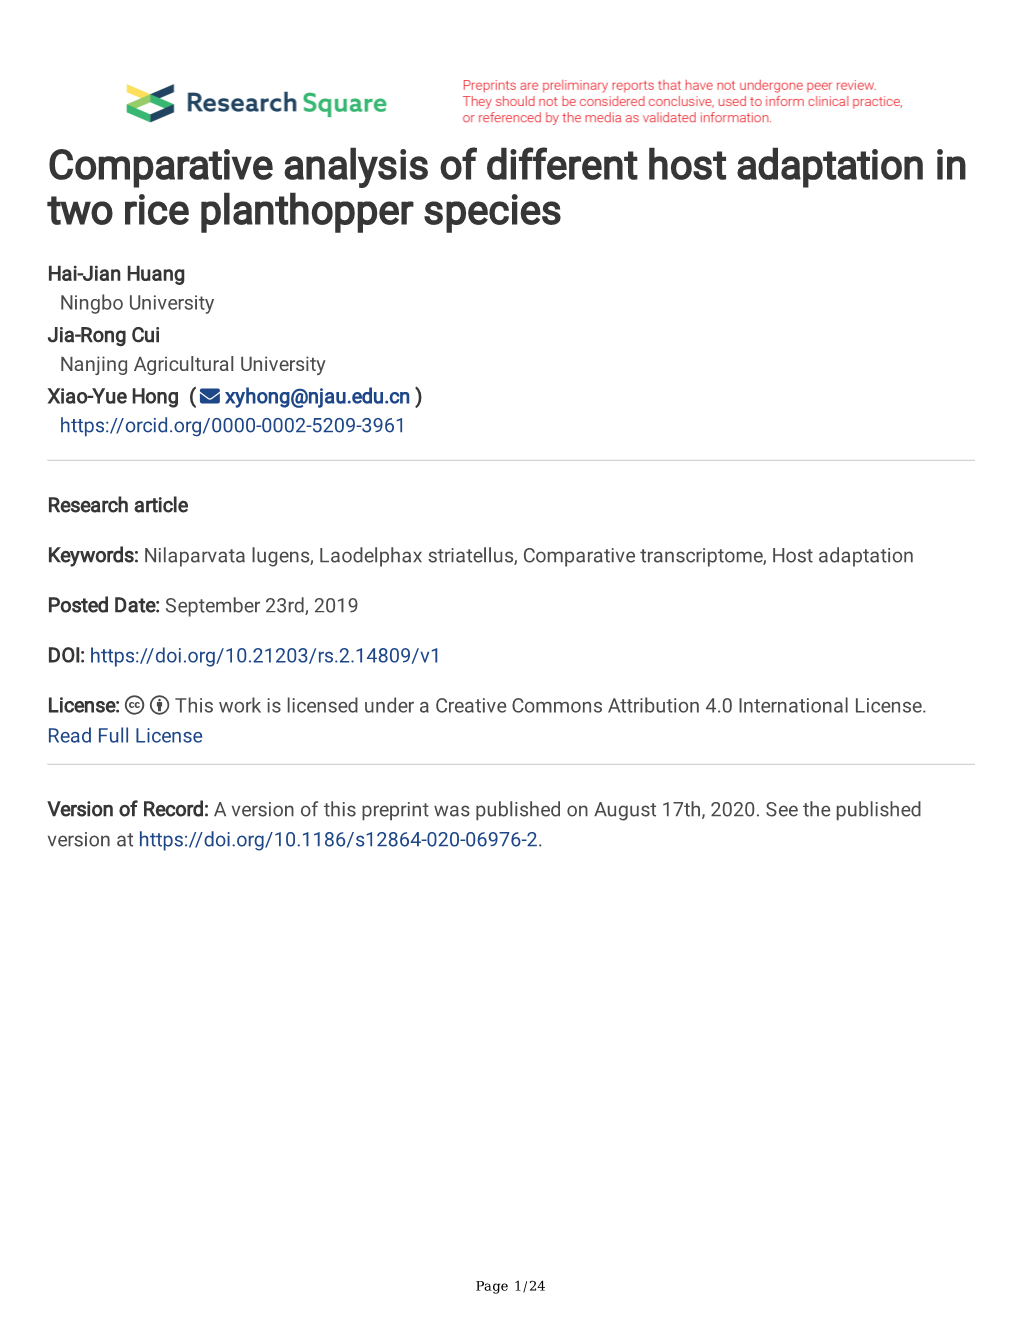 Comparative Analysis of Different Host Adaptation in Two Rice Planthopper Species